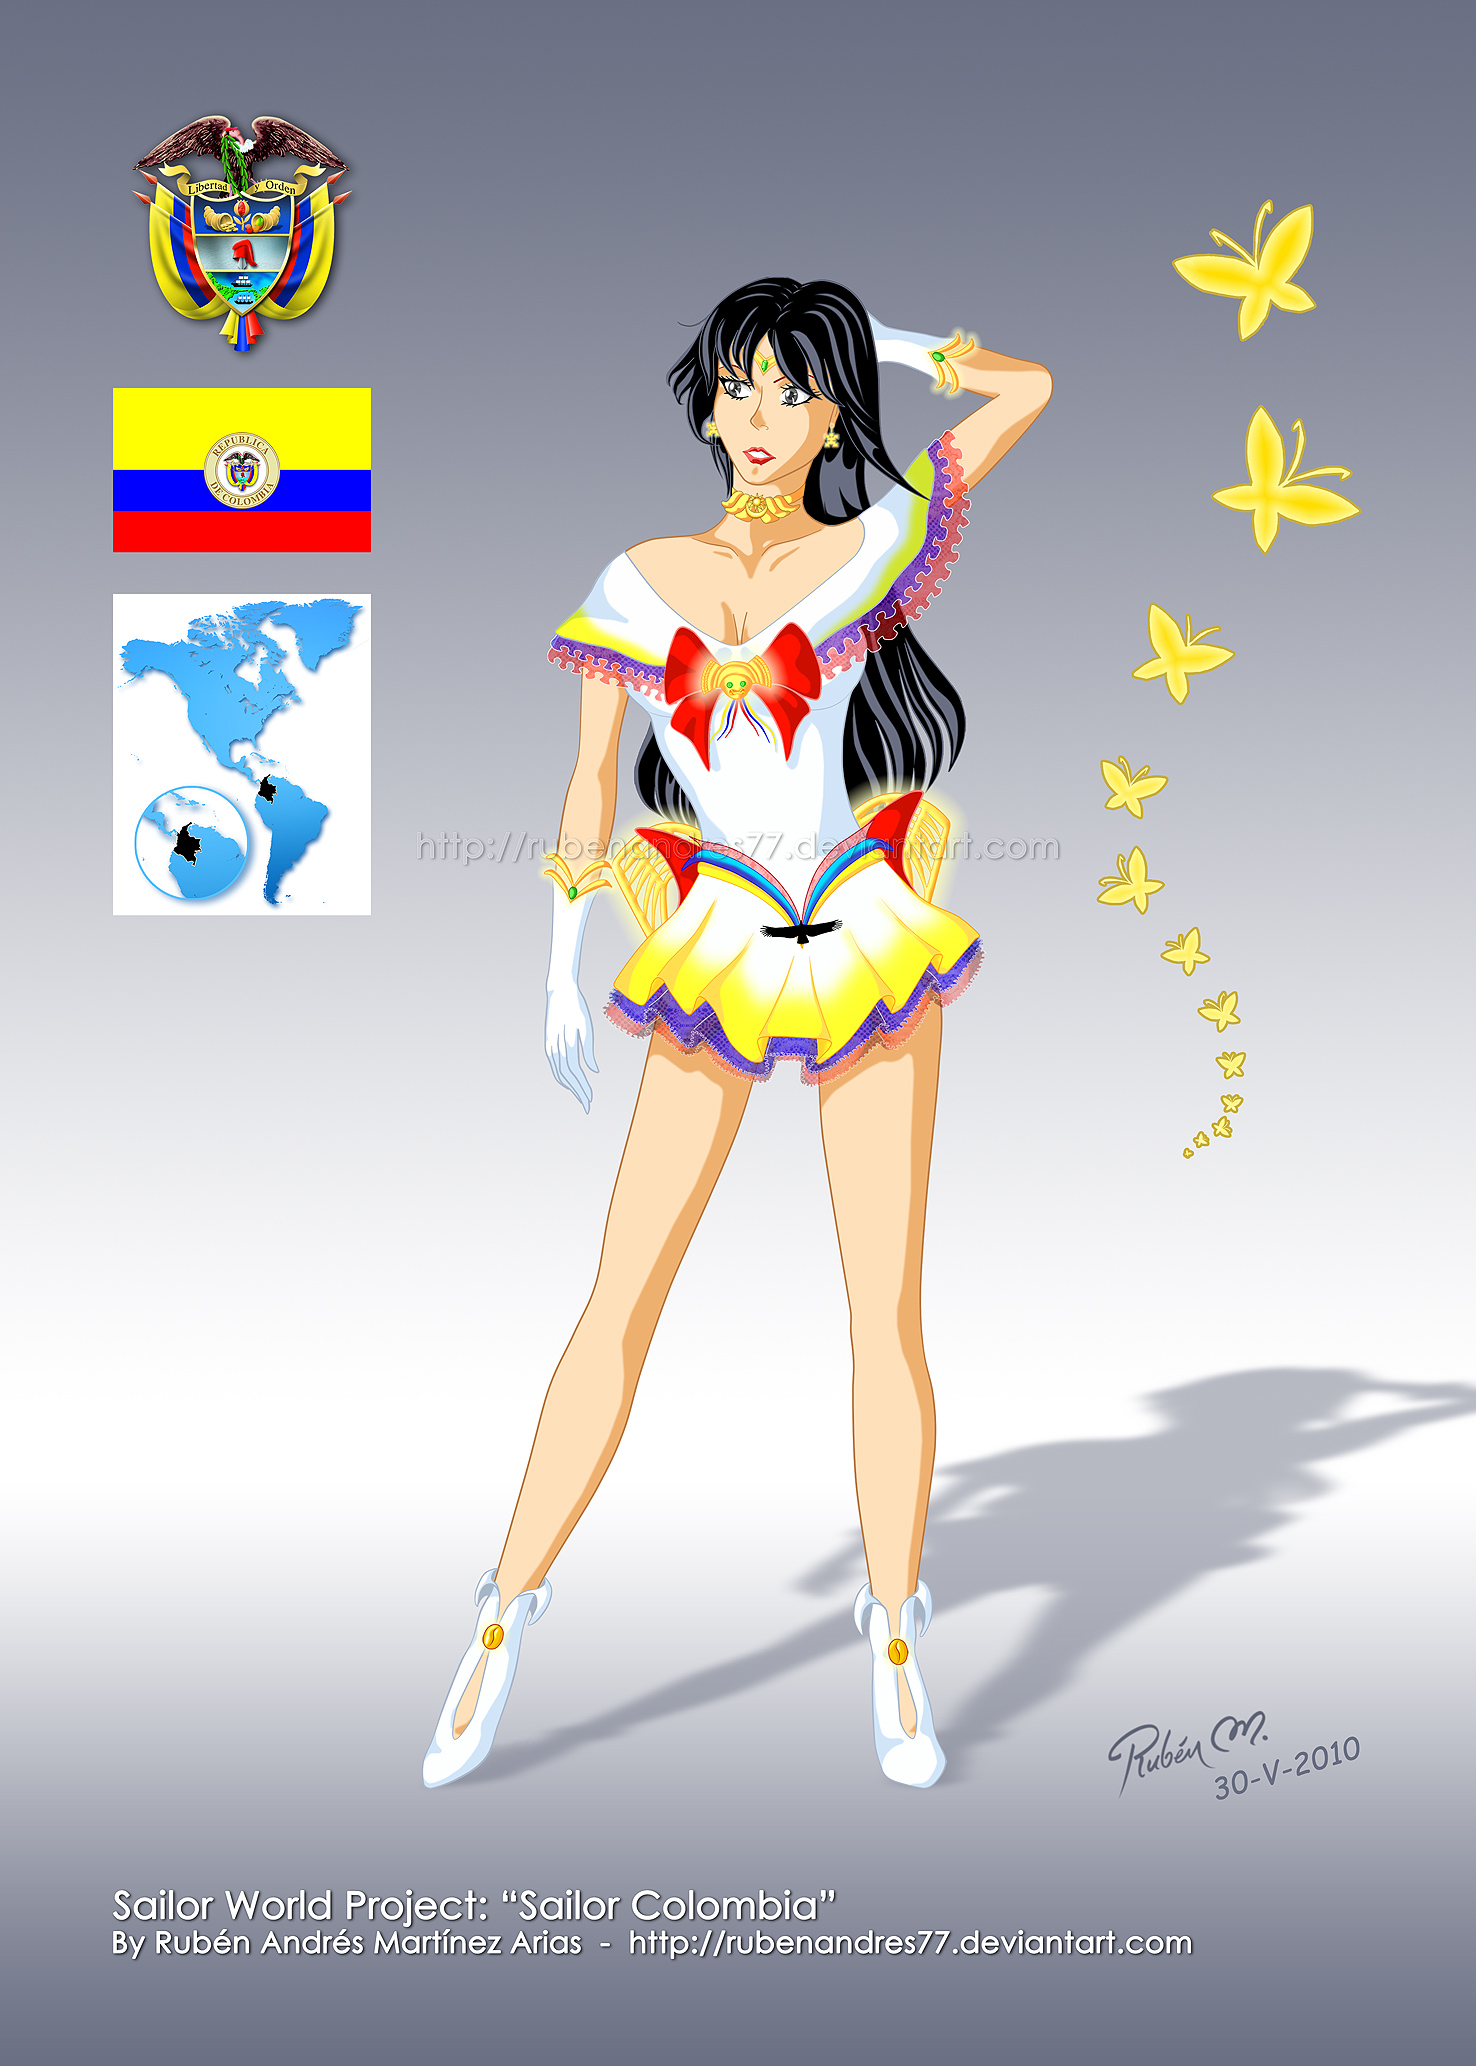 Sailor Colombia